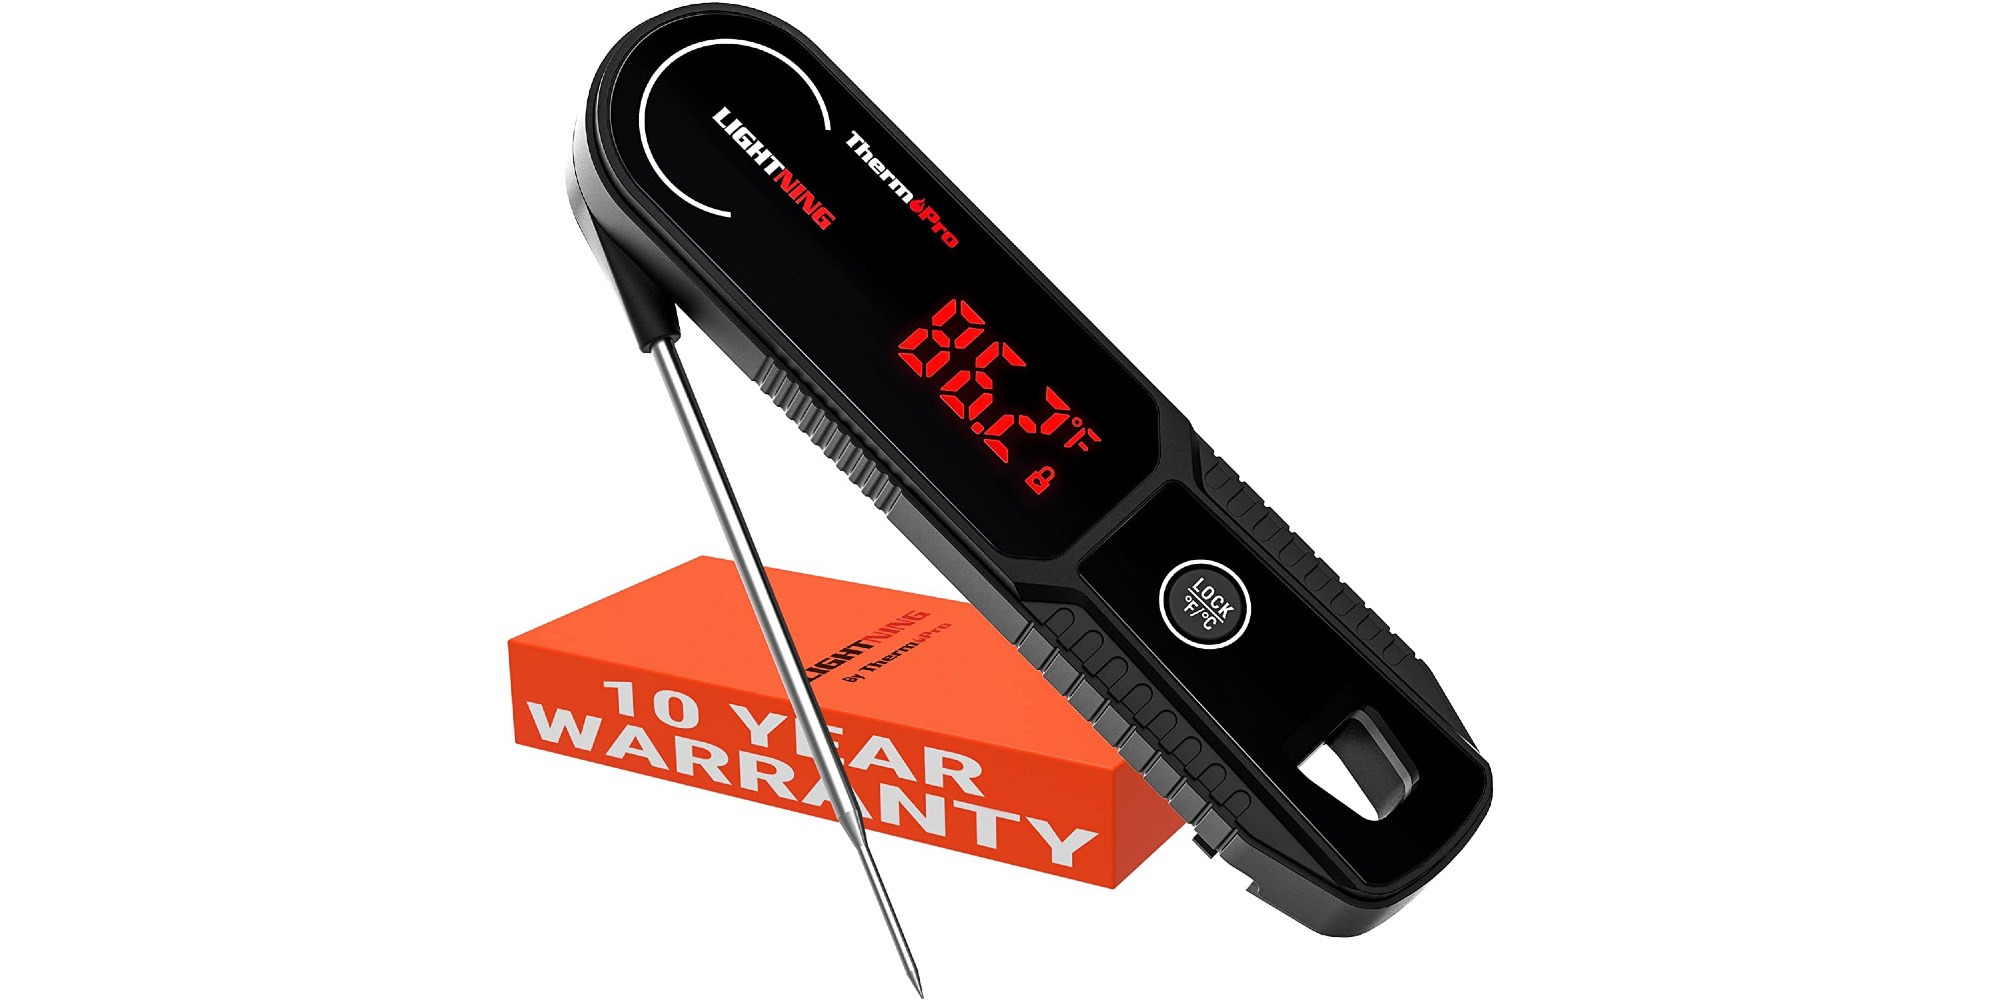 https://9to5toys.com/wp-content/uploads/sites/5/2023/03/ThermoPro-Lightning-1-Second-Instant-Meat-Thermometer.jpg